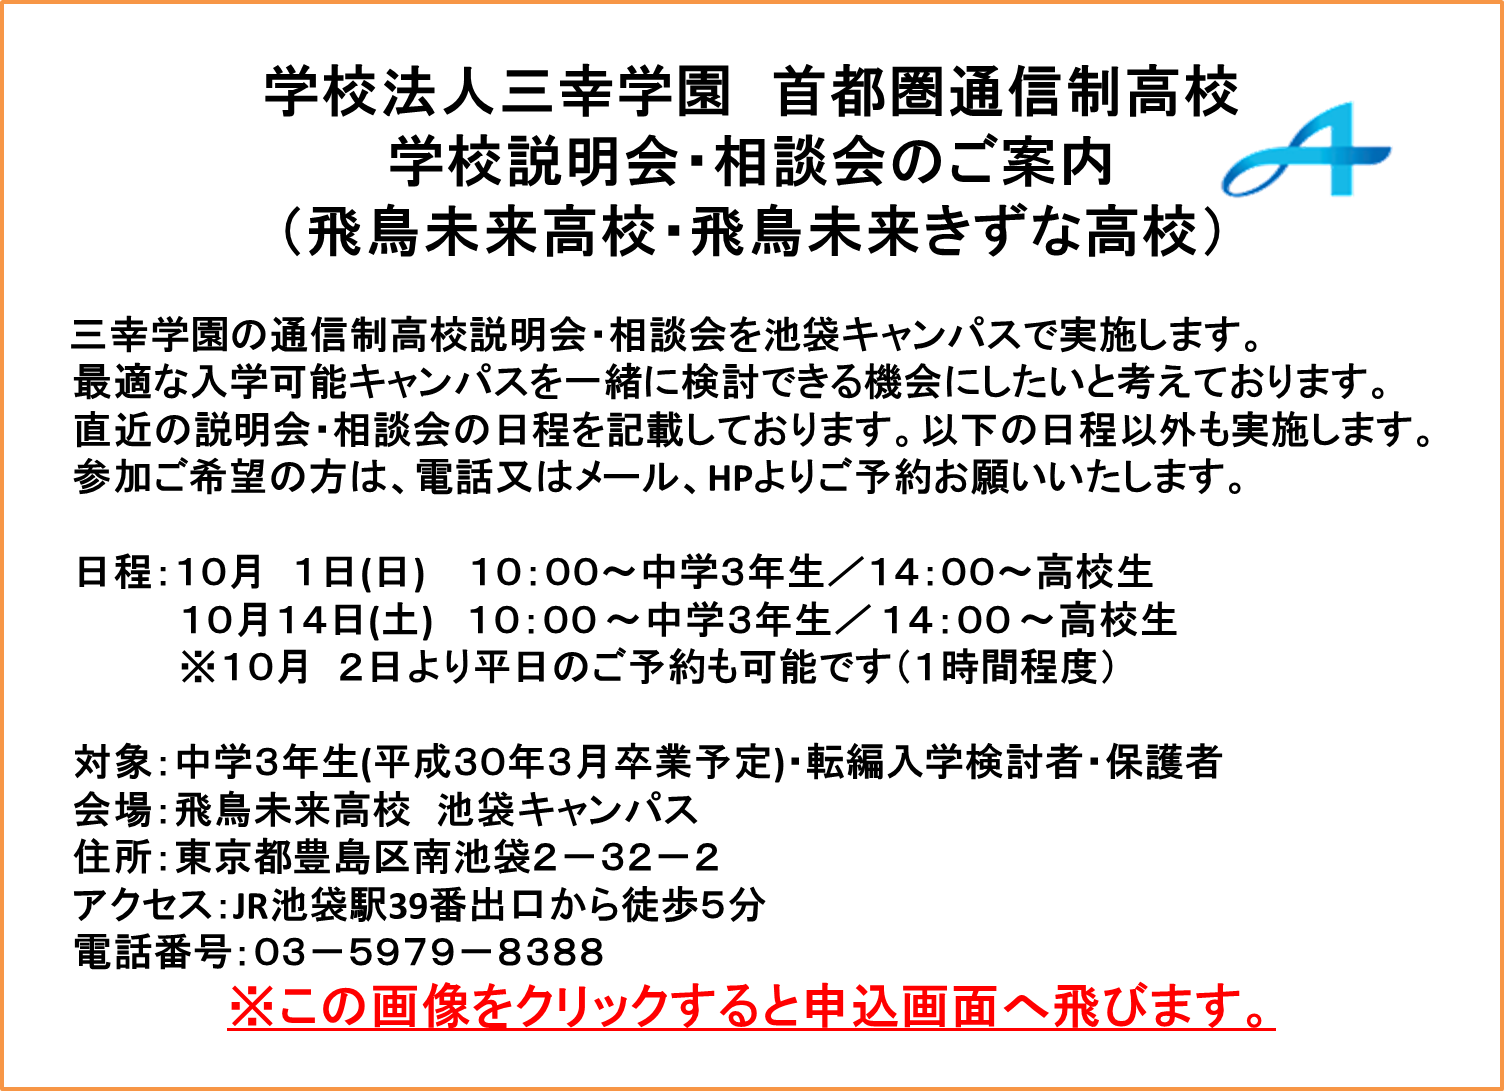 th通信制高校学校説明会案内バナー.png